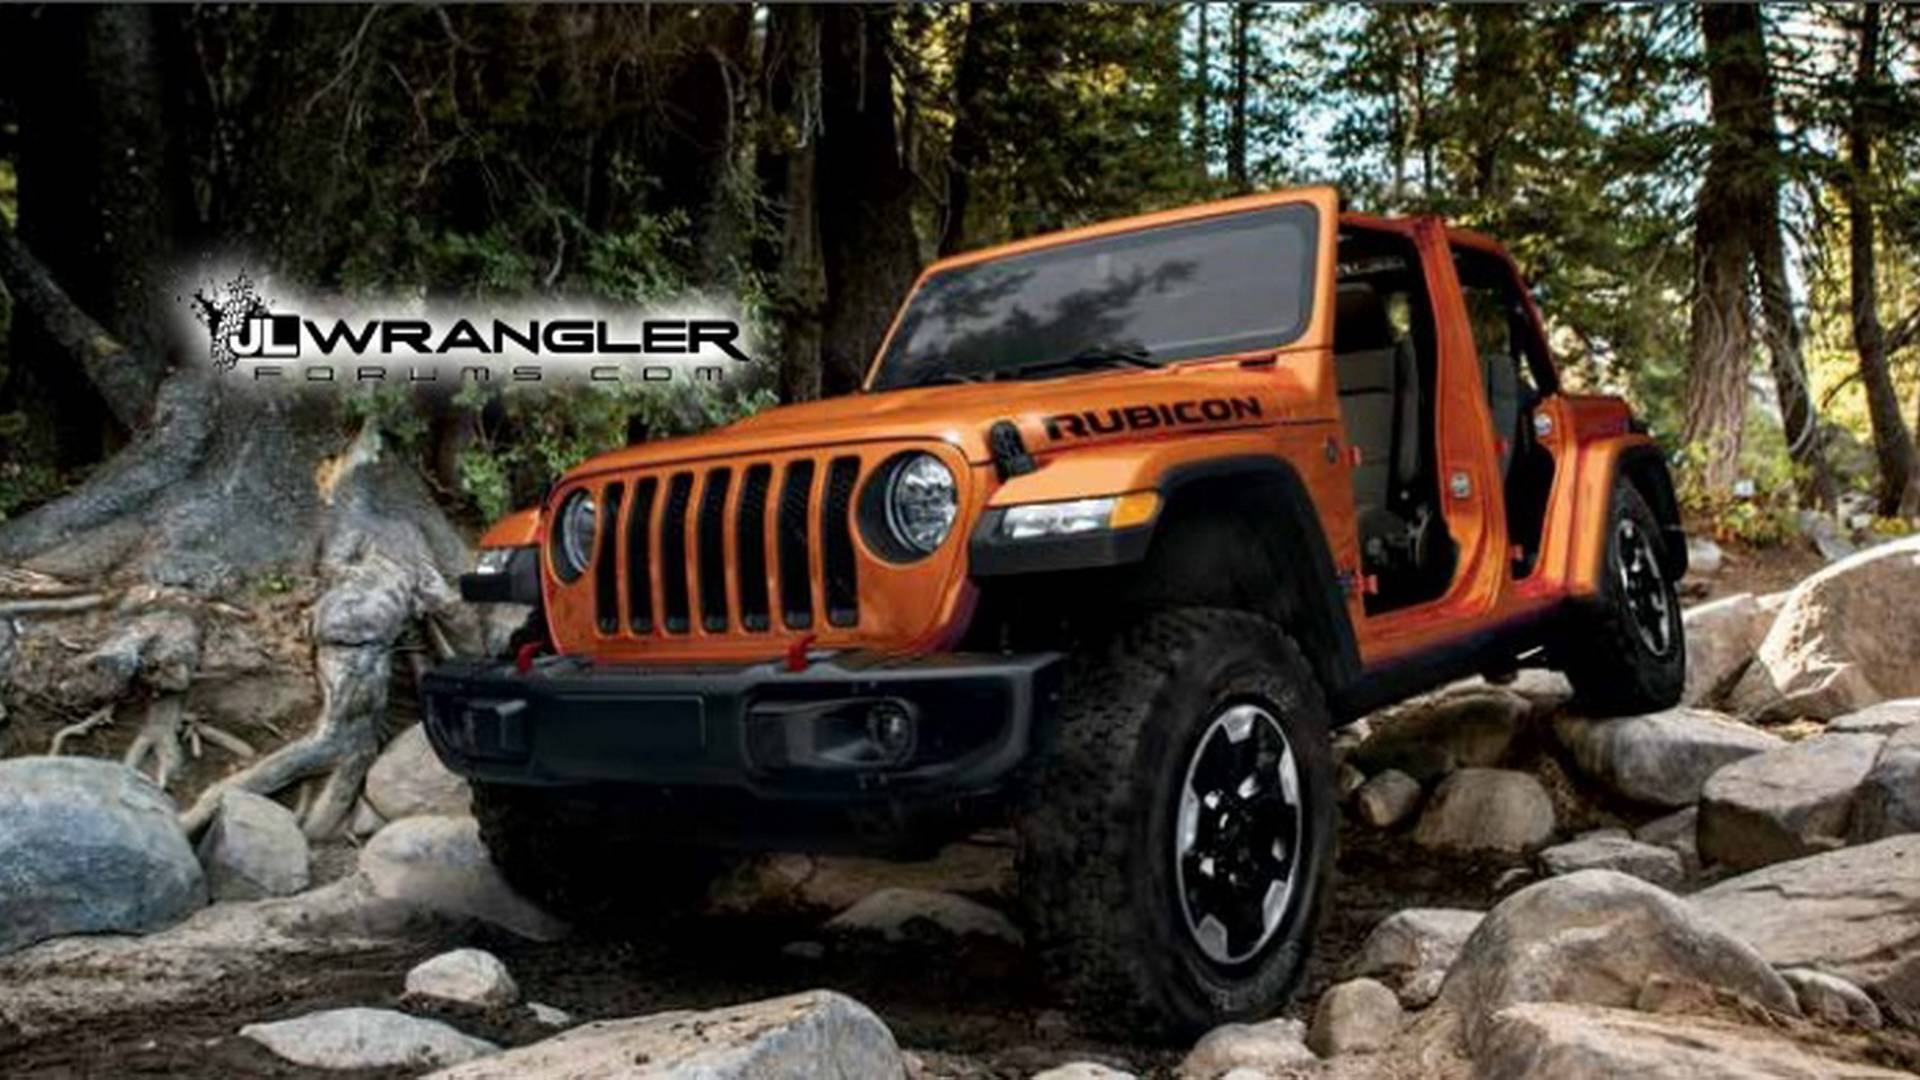 2018 Jeep Wrangler Owner's Manual, User Guide Emerge Onto The Web